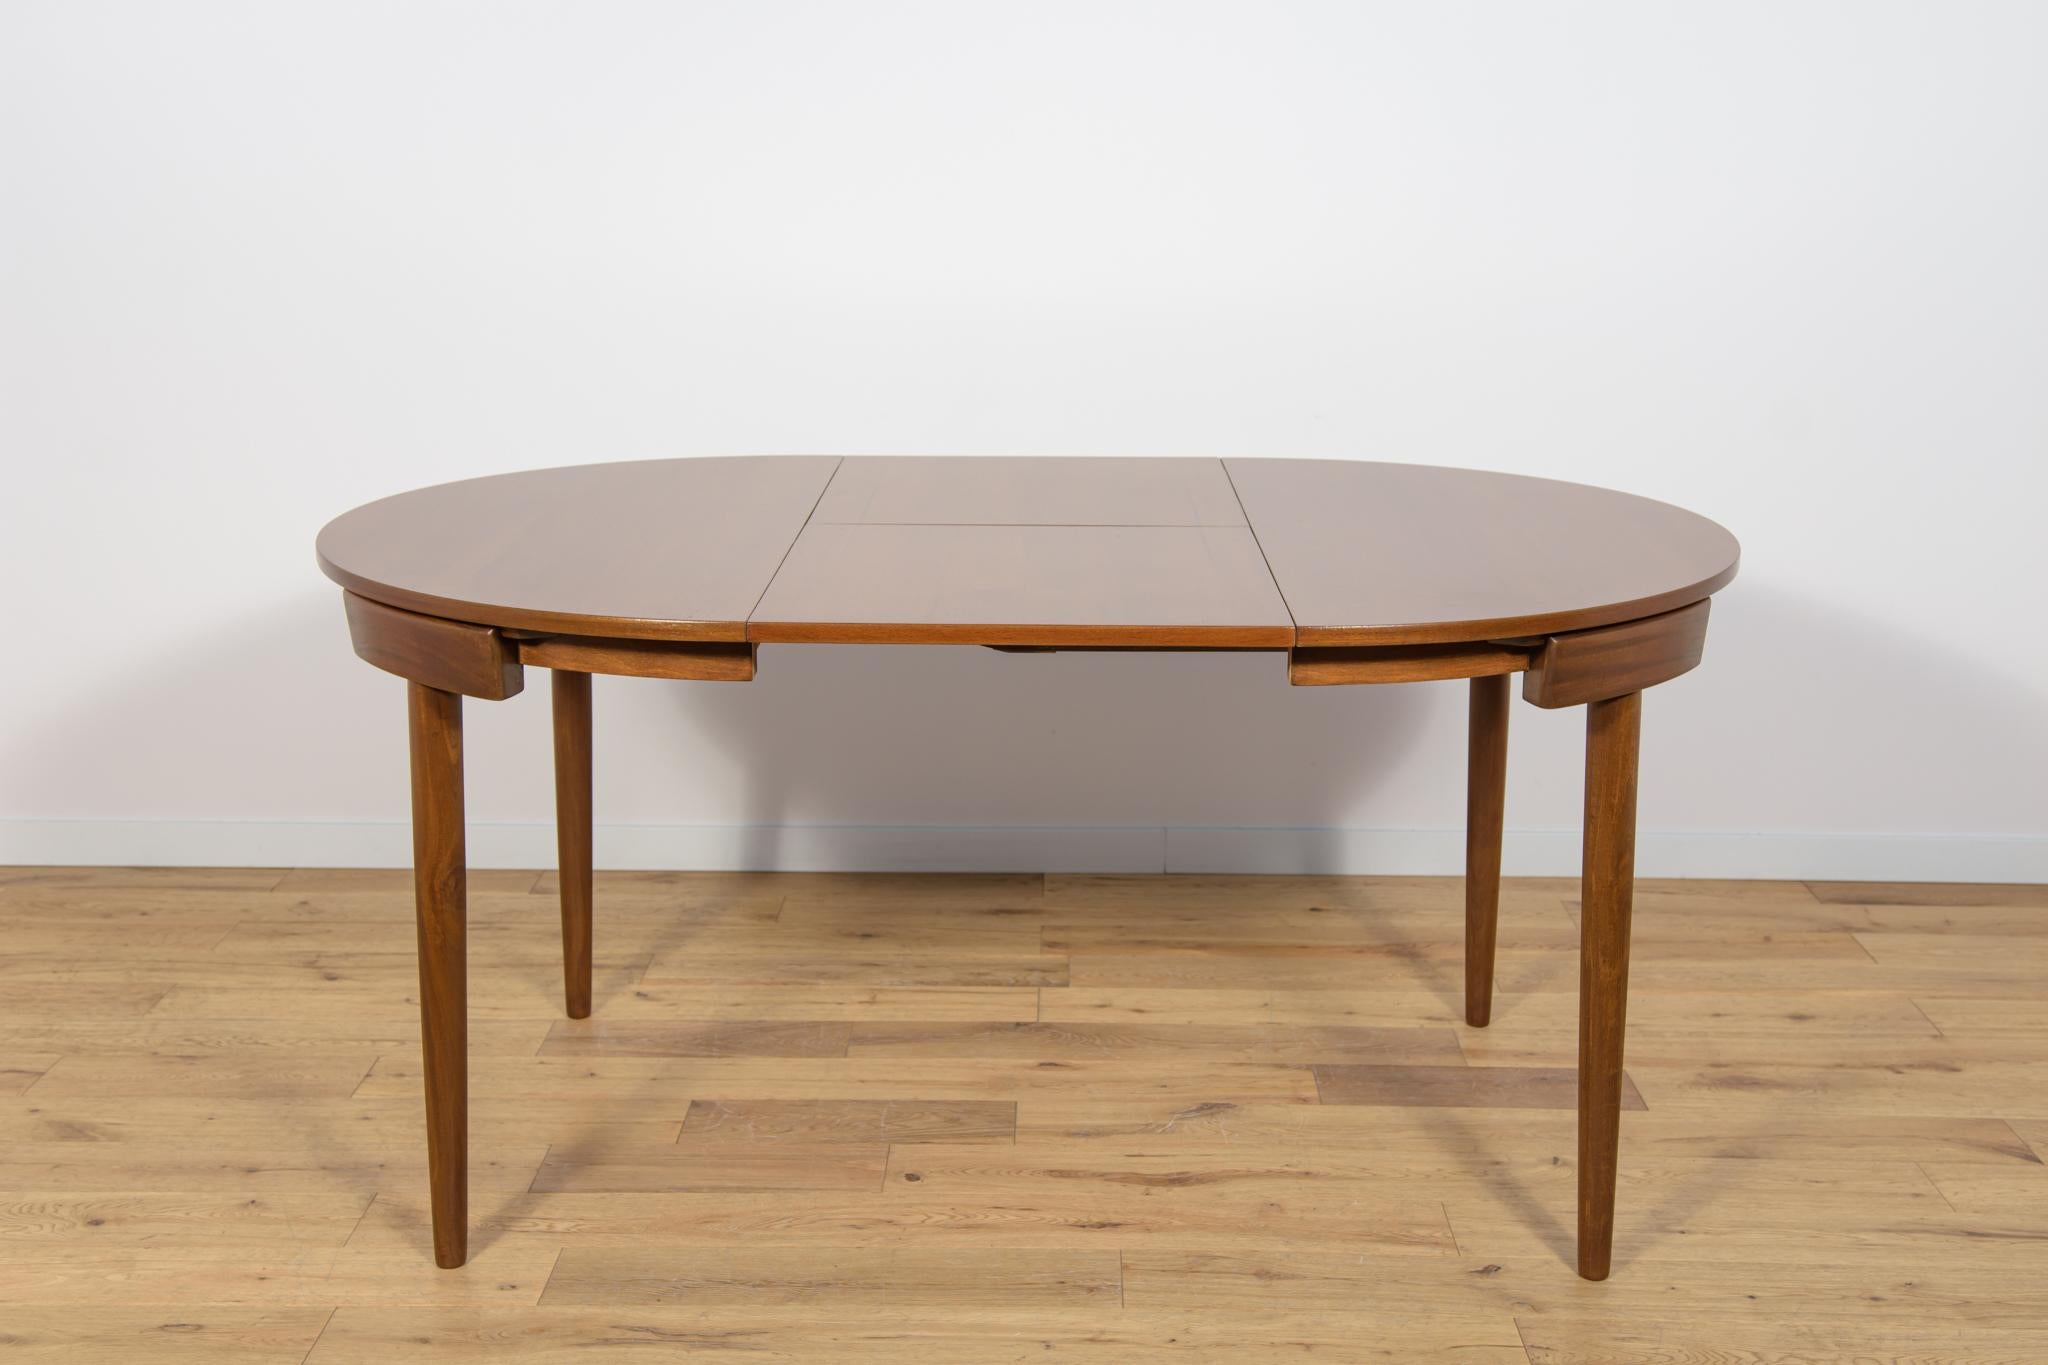  Mid-Century Teak Dining Table and Chairs Set by Hans Olsen for Frem Røjle. For Sale 7